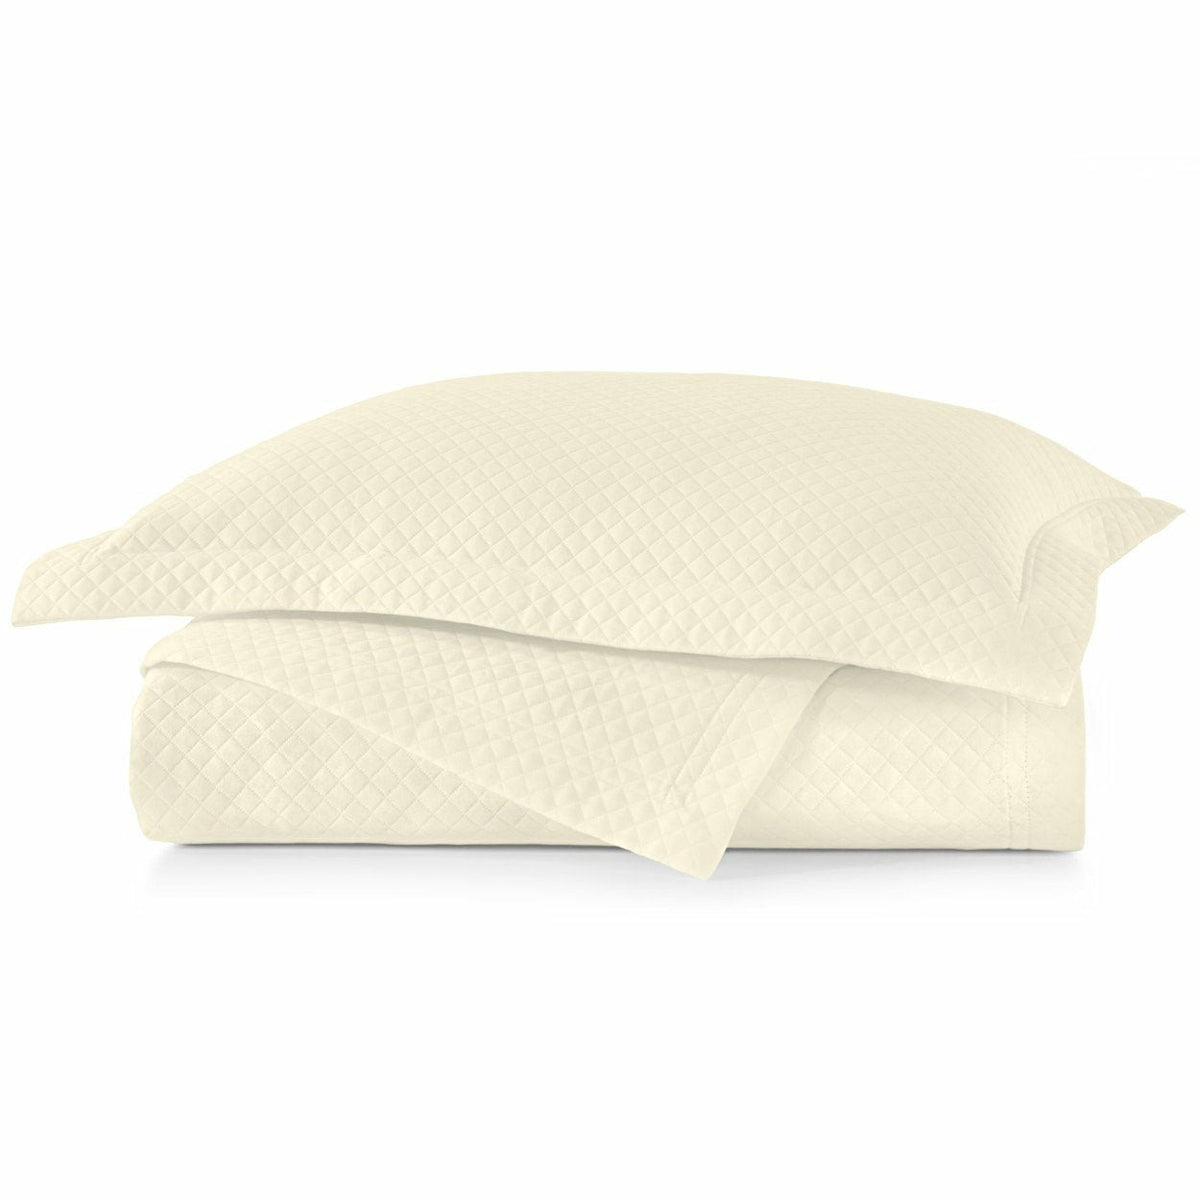 Peacock Alley Oxford Tailored Bedding Coverlet Ivory Fine Linens